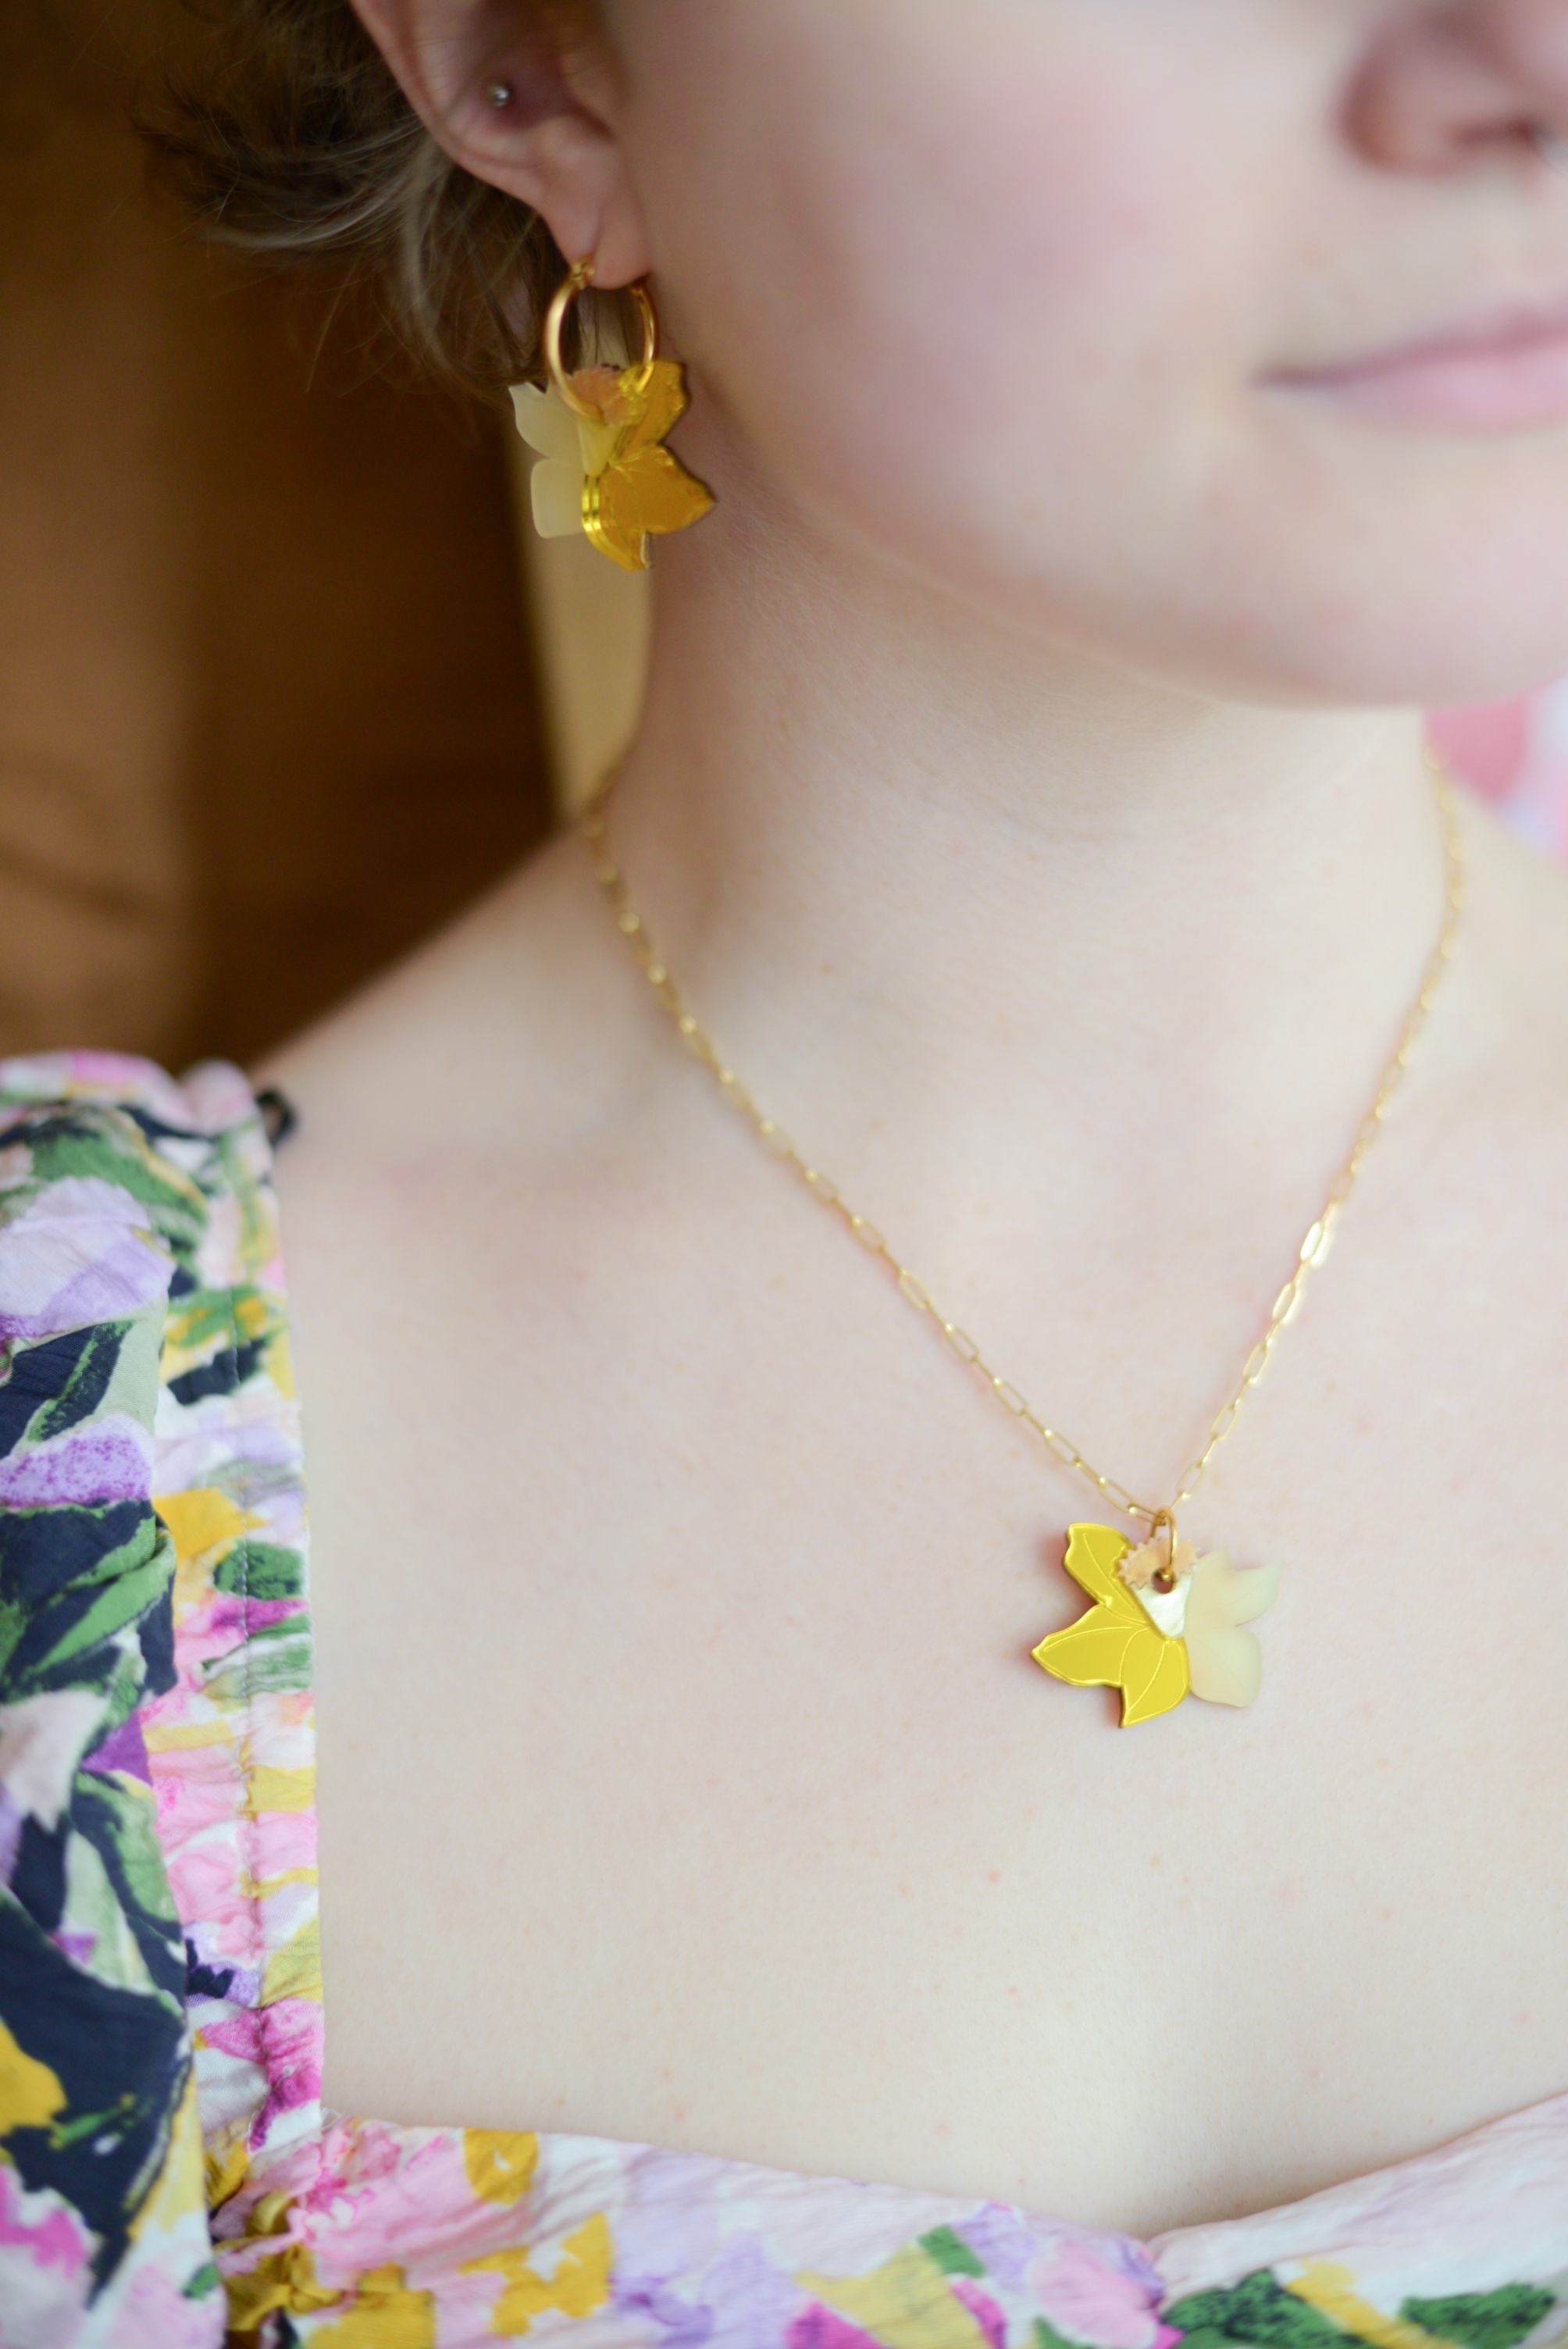 Daffodil Earring Workshop- Wed 20th March 6-8.30pm @ Teacups & Cupcakes